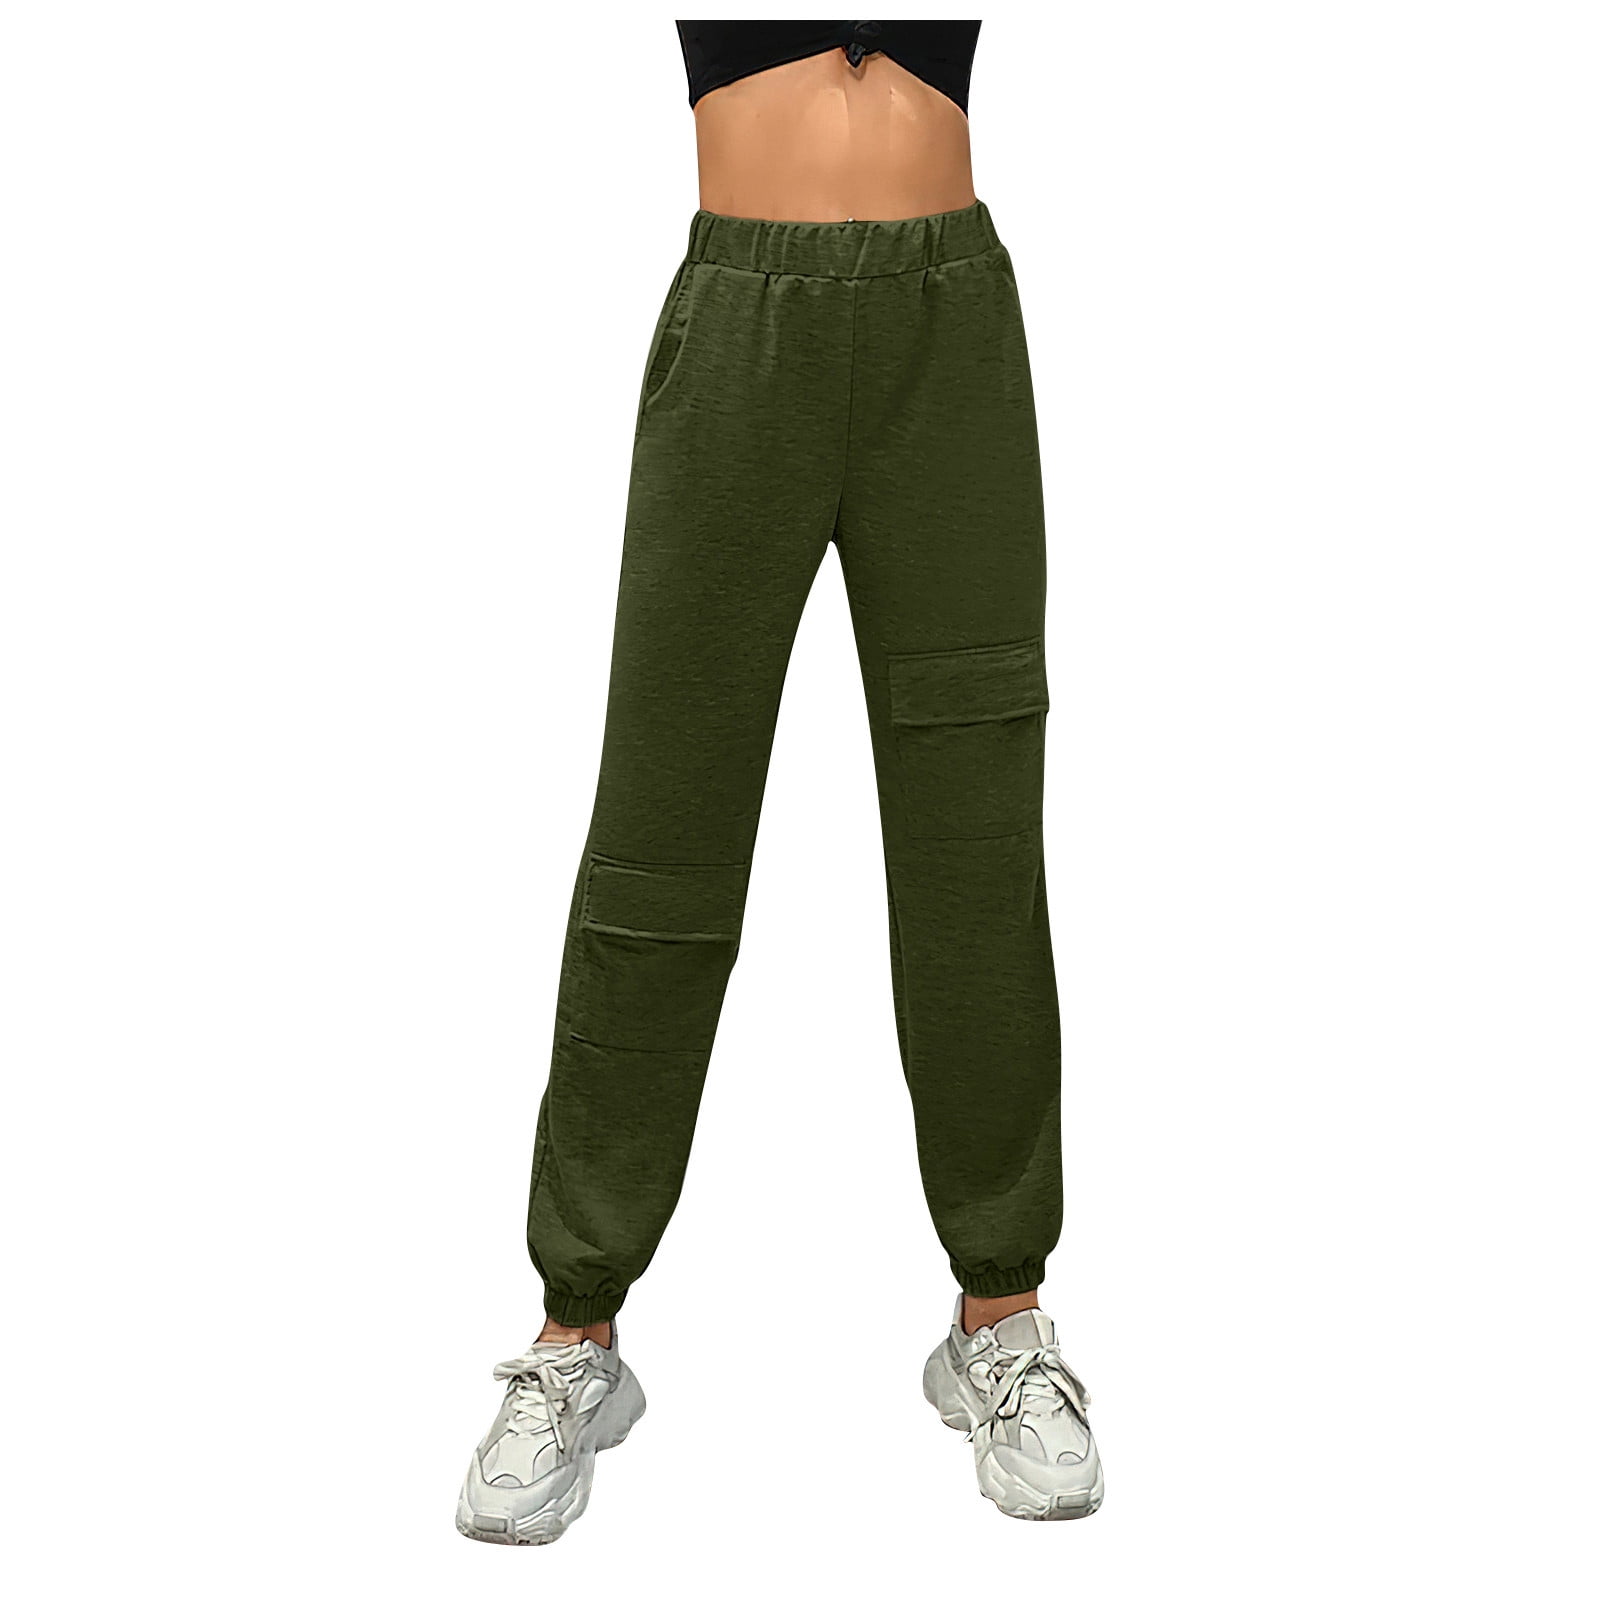 What color top goes with green jogger pants? 4FashionAdvice